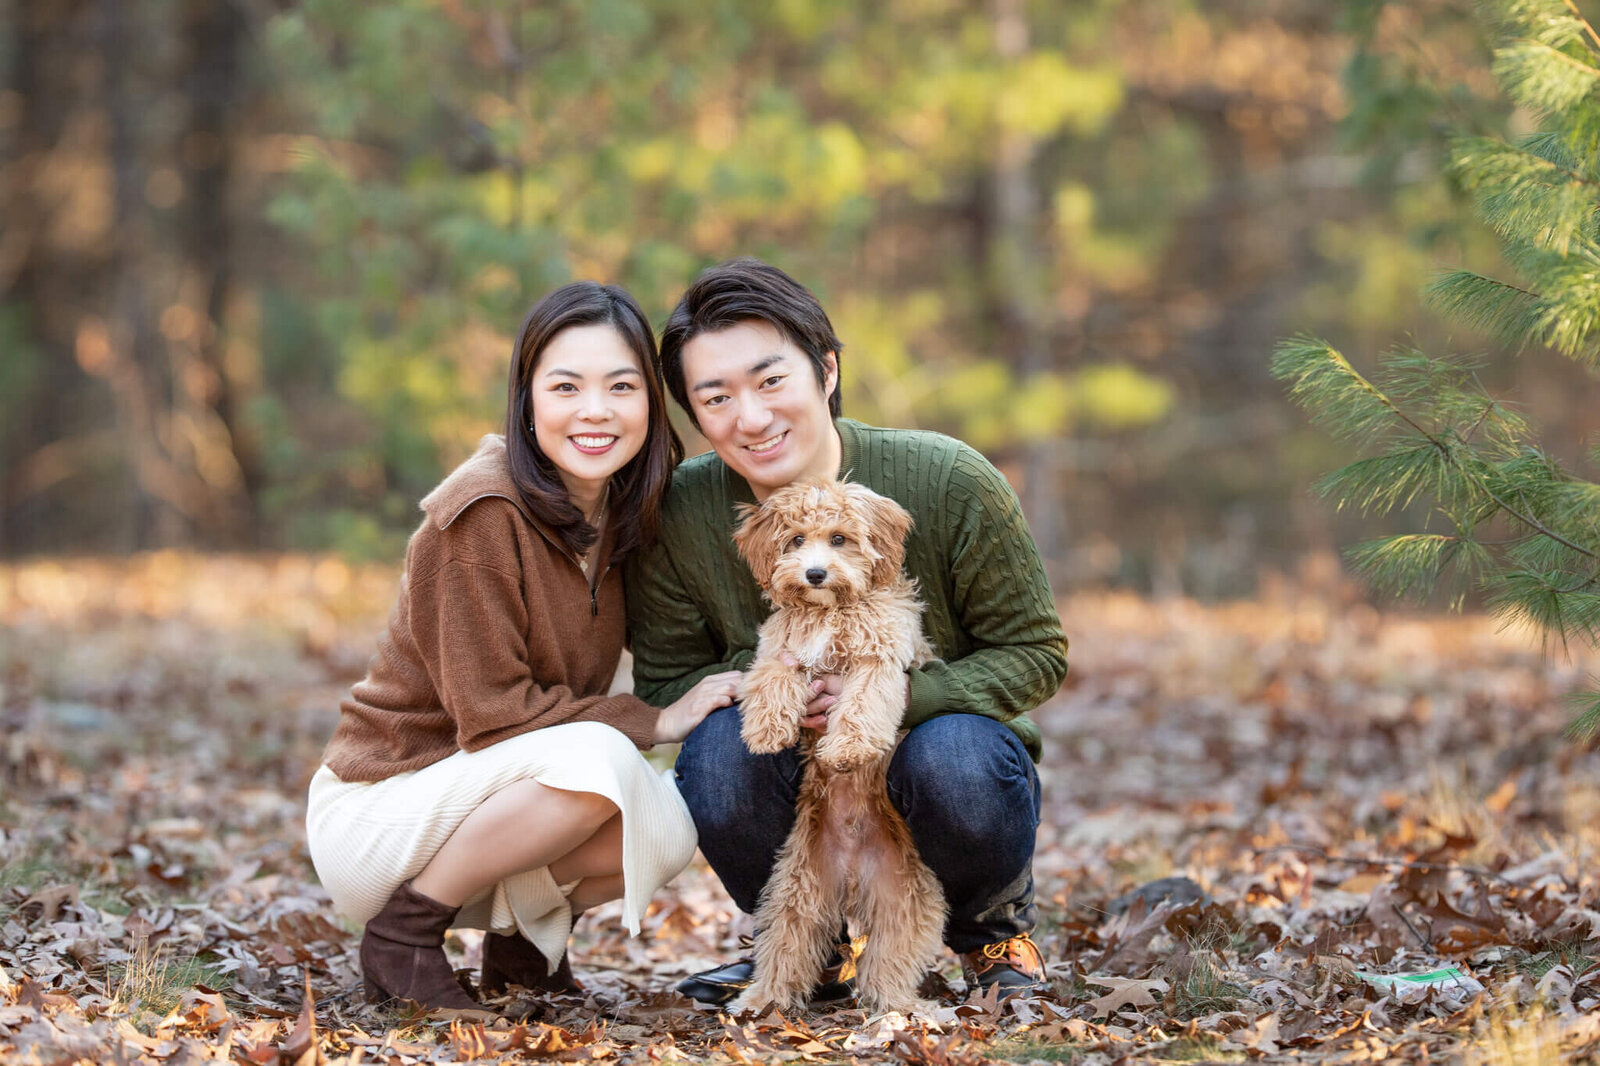 Boston area family with their Golden Doodle puppy puppy